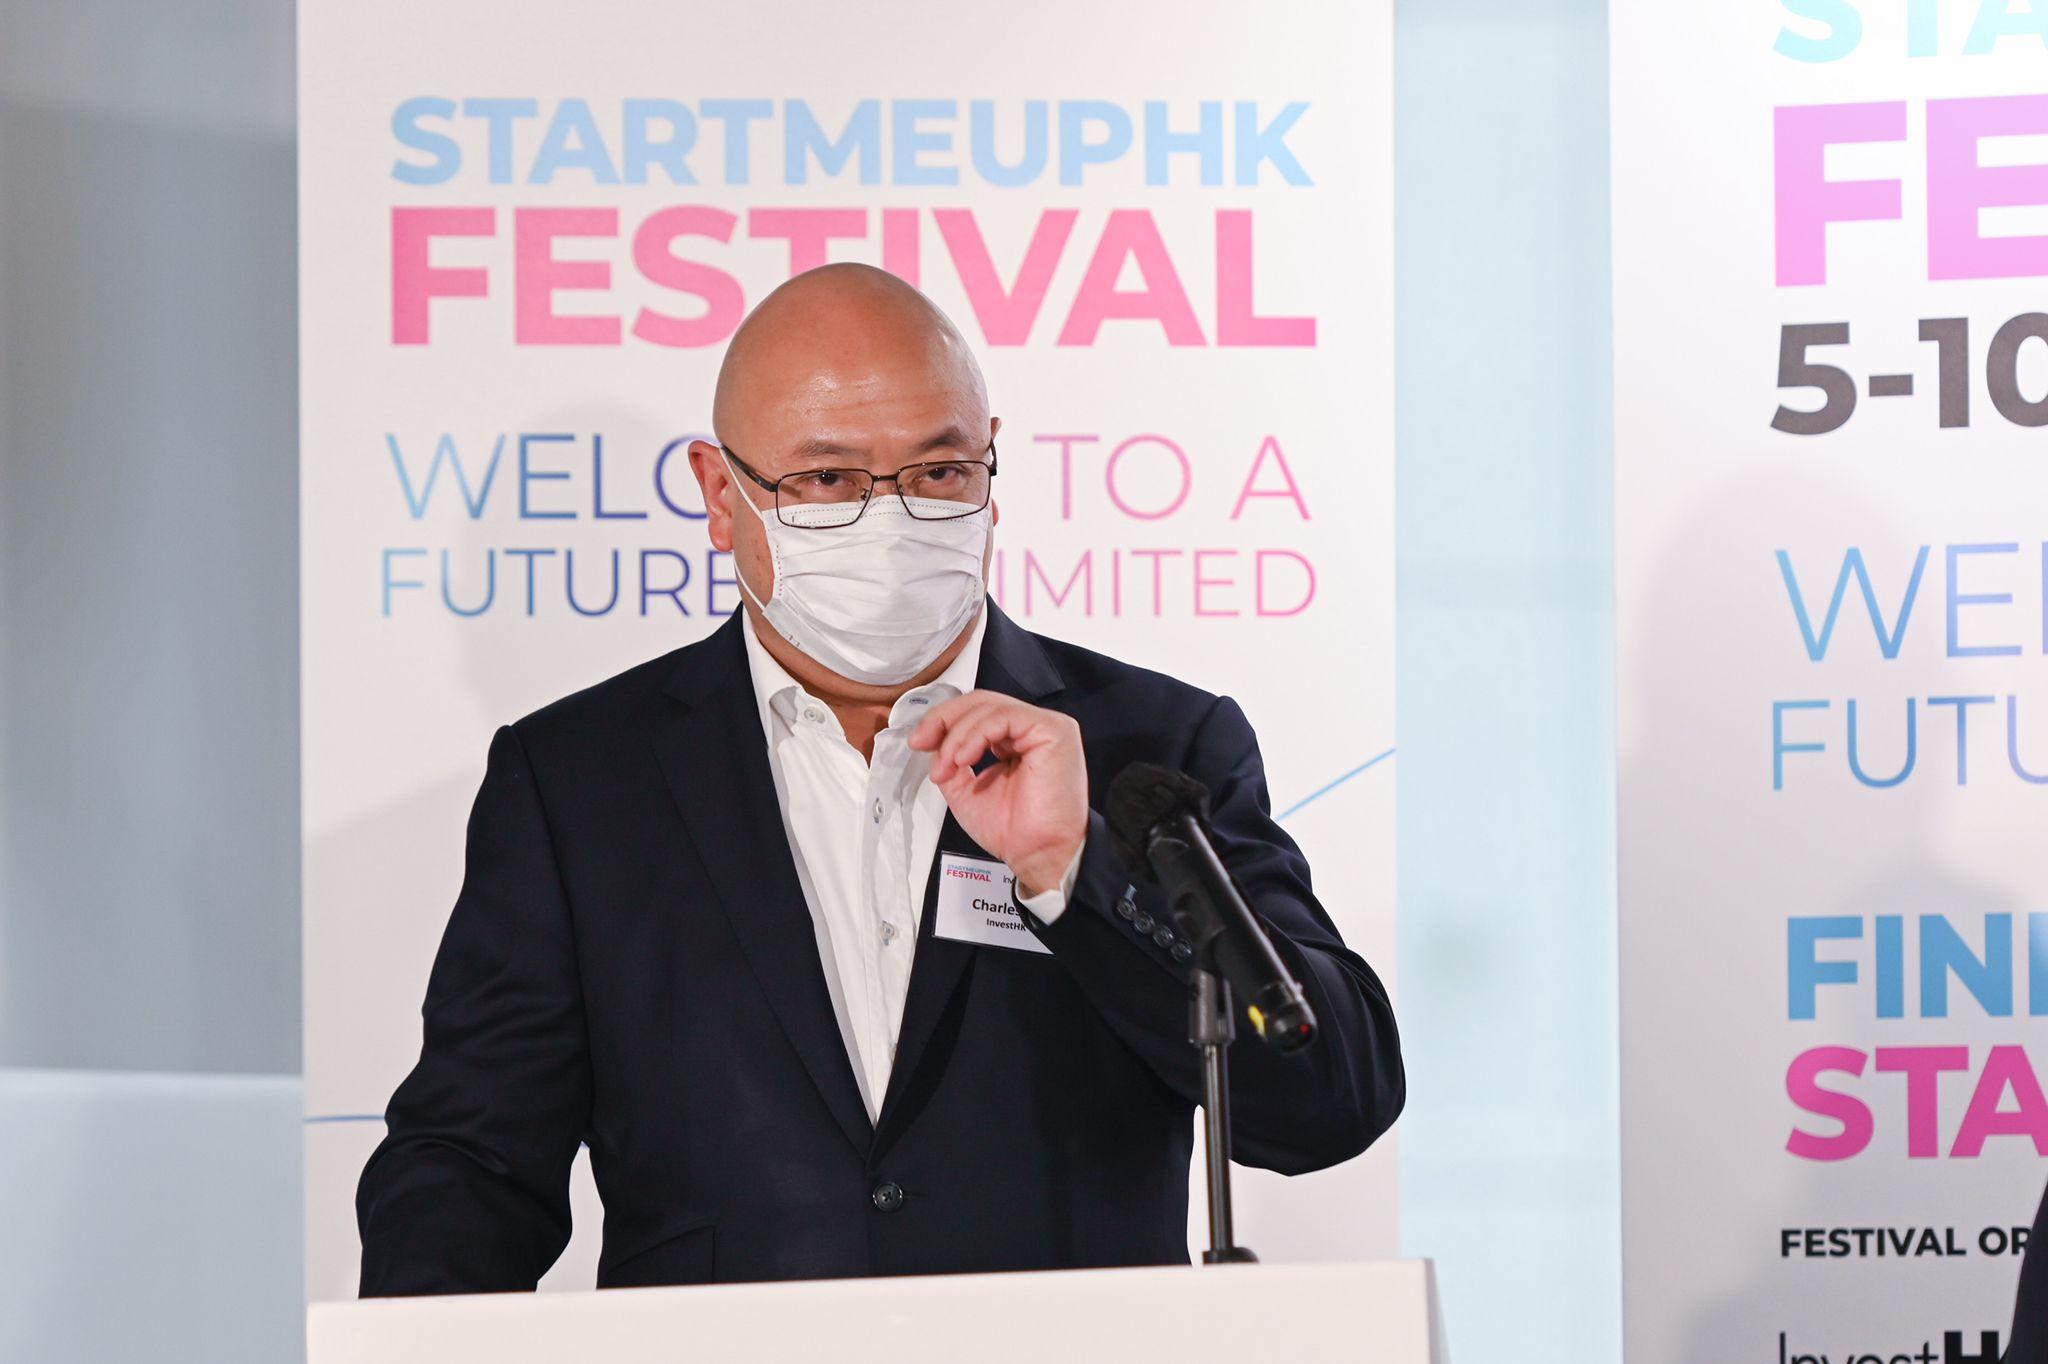 The annual StartmeupHK Festival curated by Invest Hong Kong (InvestHK) returns in a hybrid format on September 5 to 10 following last year's success. Photo shows Associate Director-General of Investment Promotion of InvestHK Mr Charles Ng delivering the welcoming remarks.